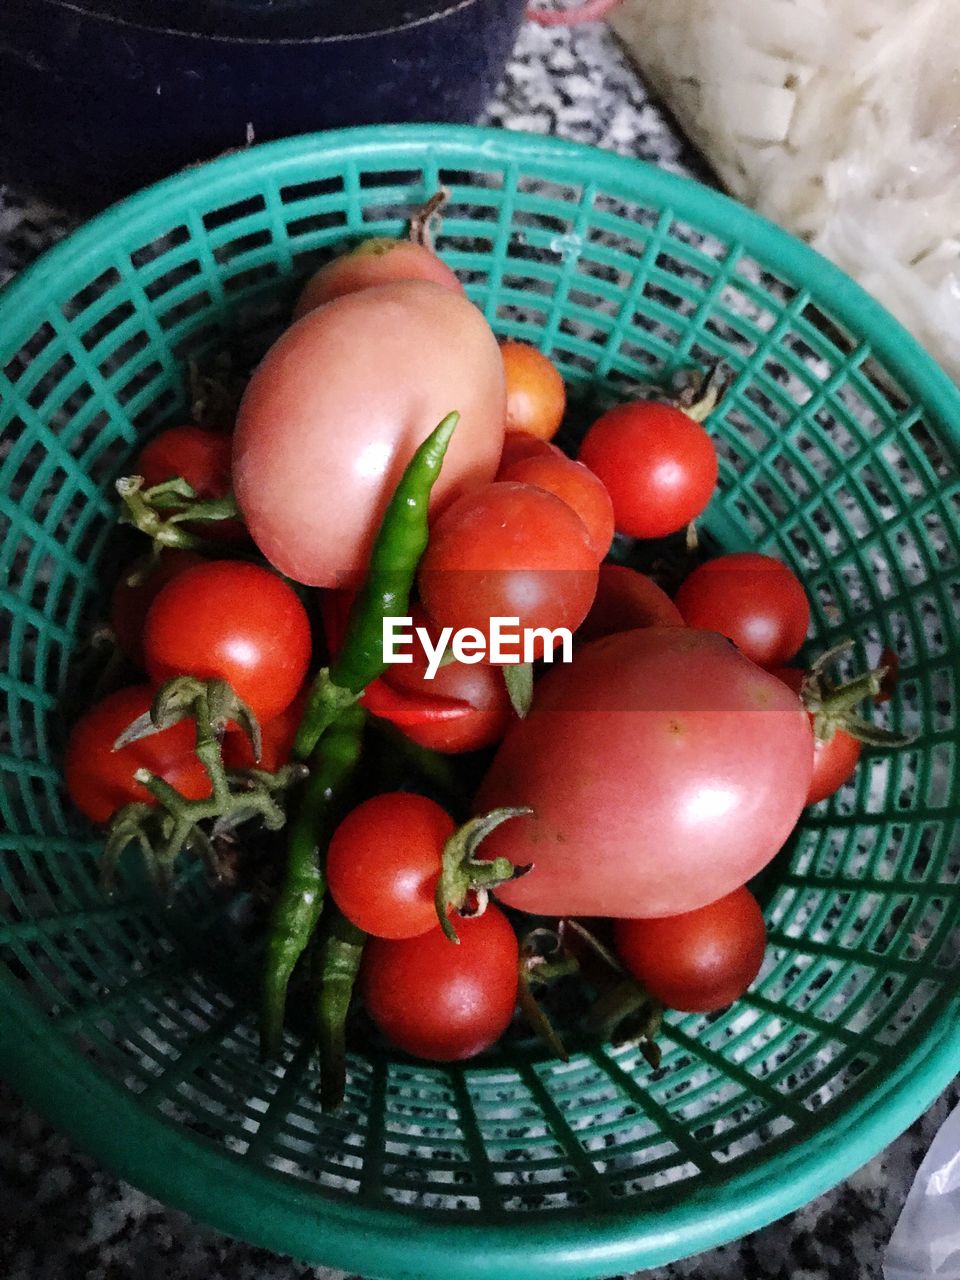 CLOSE-UP OF TOMATOES IN BASKET